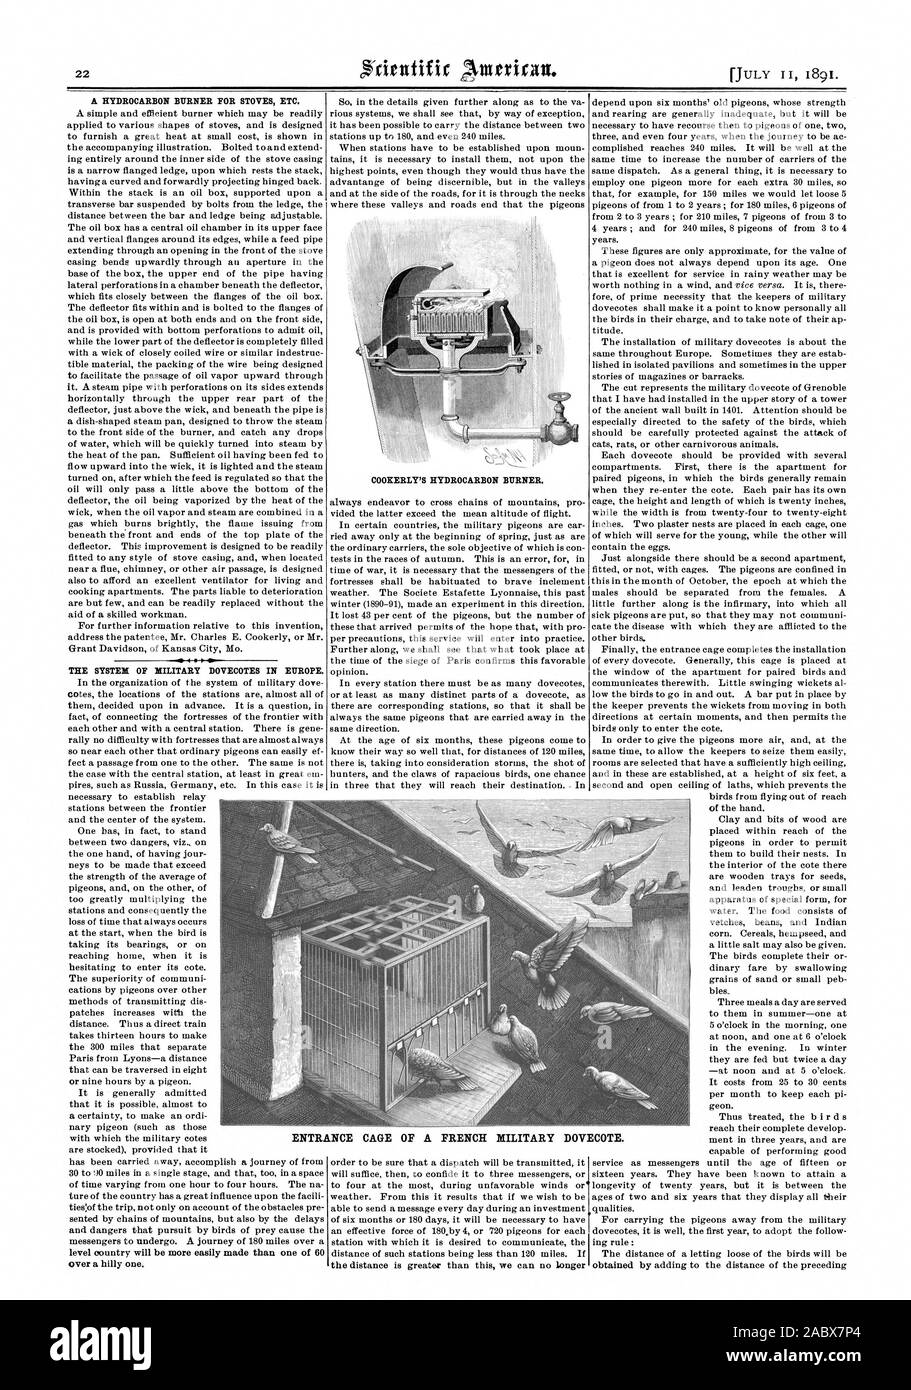 A HYDROCARBON BURNER FOR STOVES ETC. THE SYSTEM OF MILITARY DOVECOTES IN EUROPE. COOKERLY'S HYDROCARBON BURNER. ENTRANCE CAGE OF A FRENCH MILITARY DOVECOTE., scientific american, 1891-07-11 Stock Photo